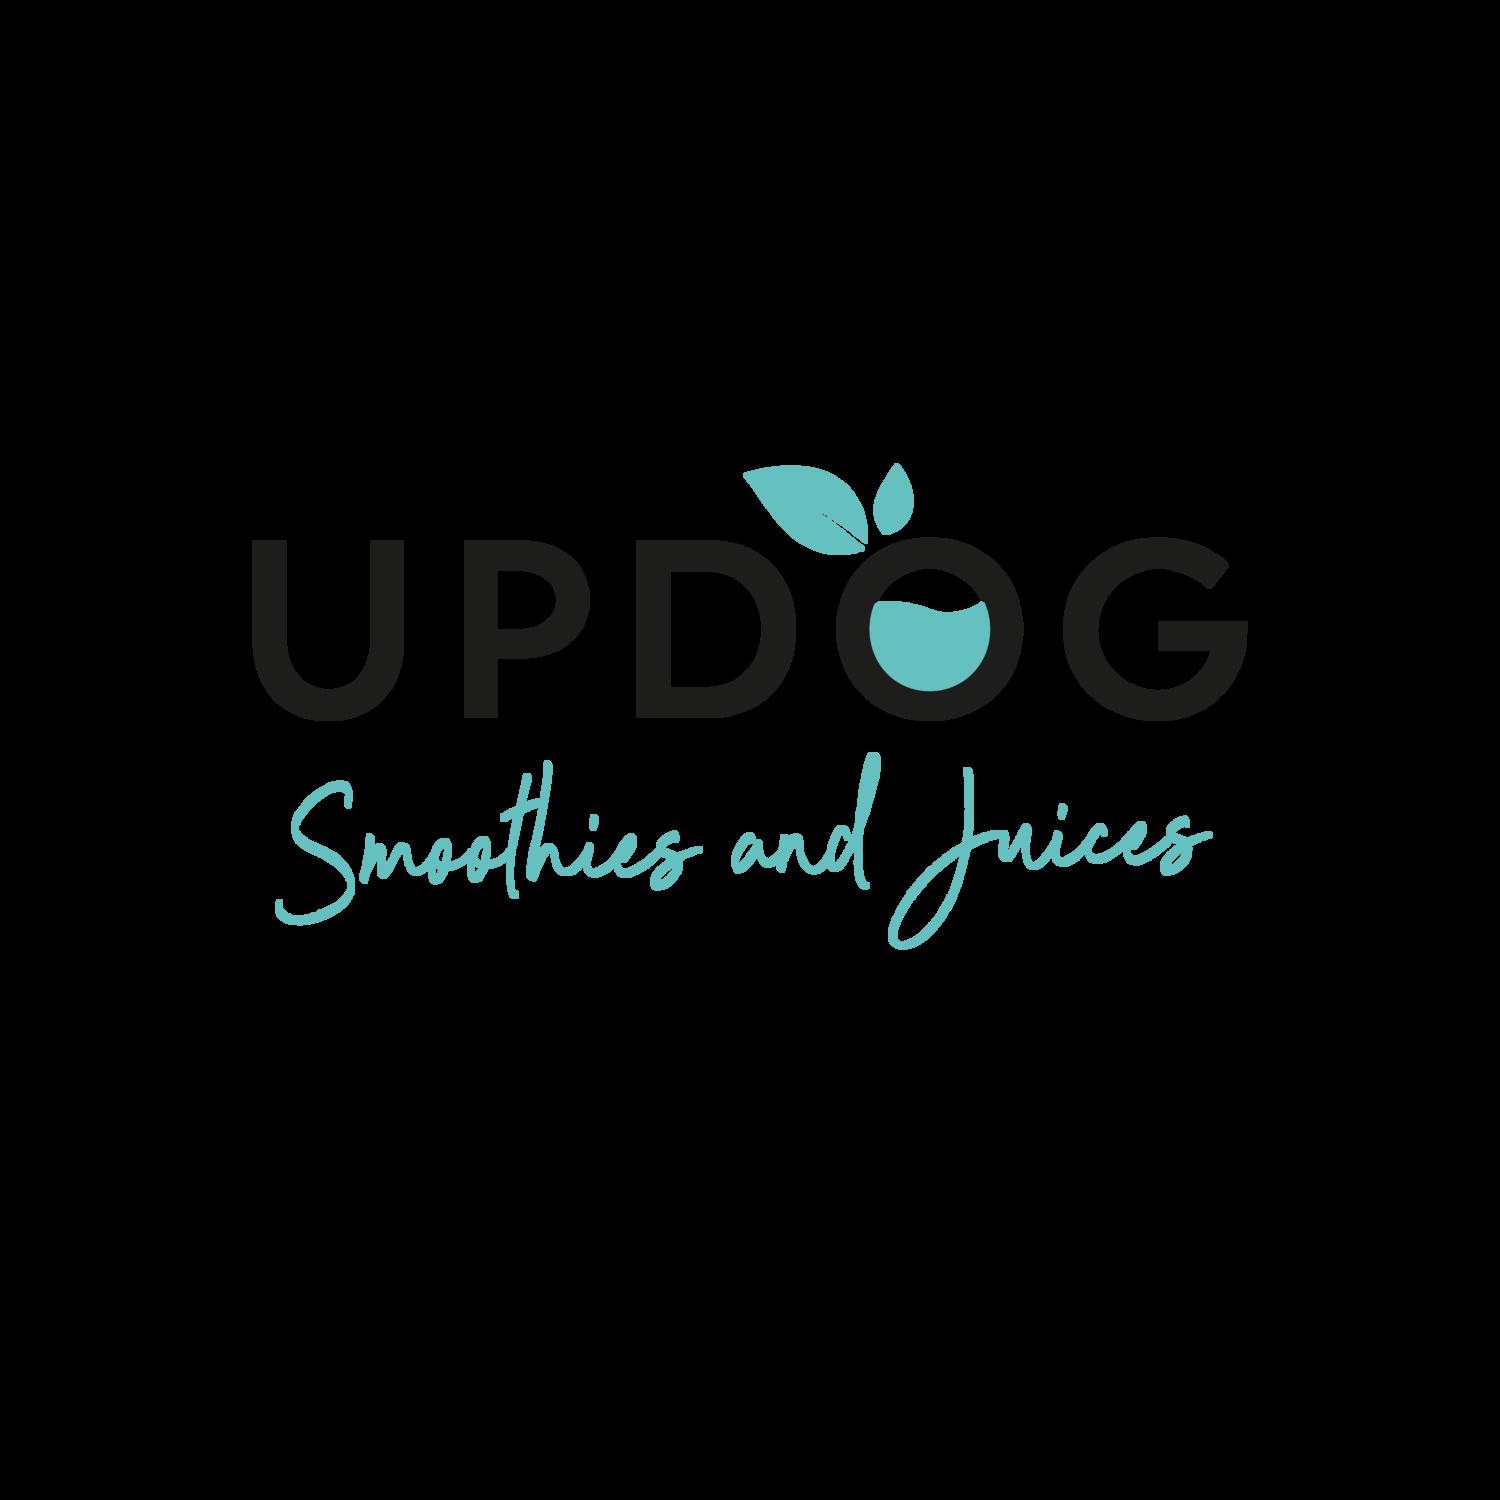 UpDog Smoothies and Juices Marietta